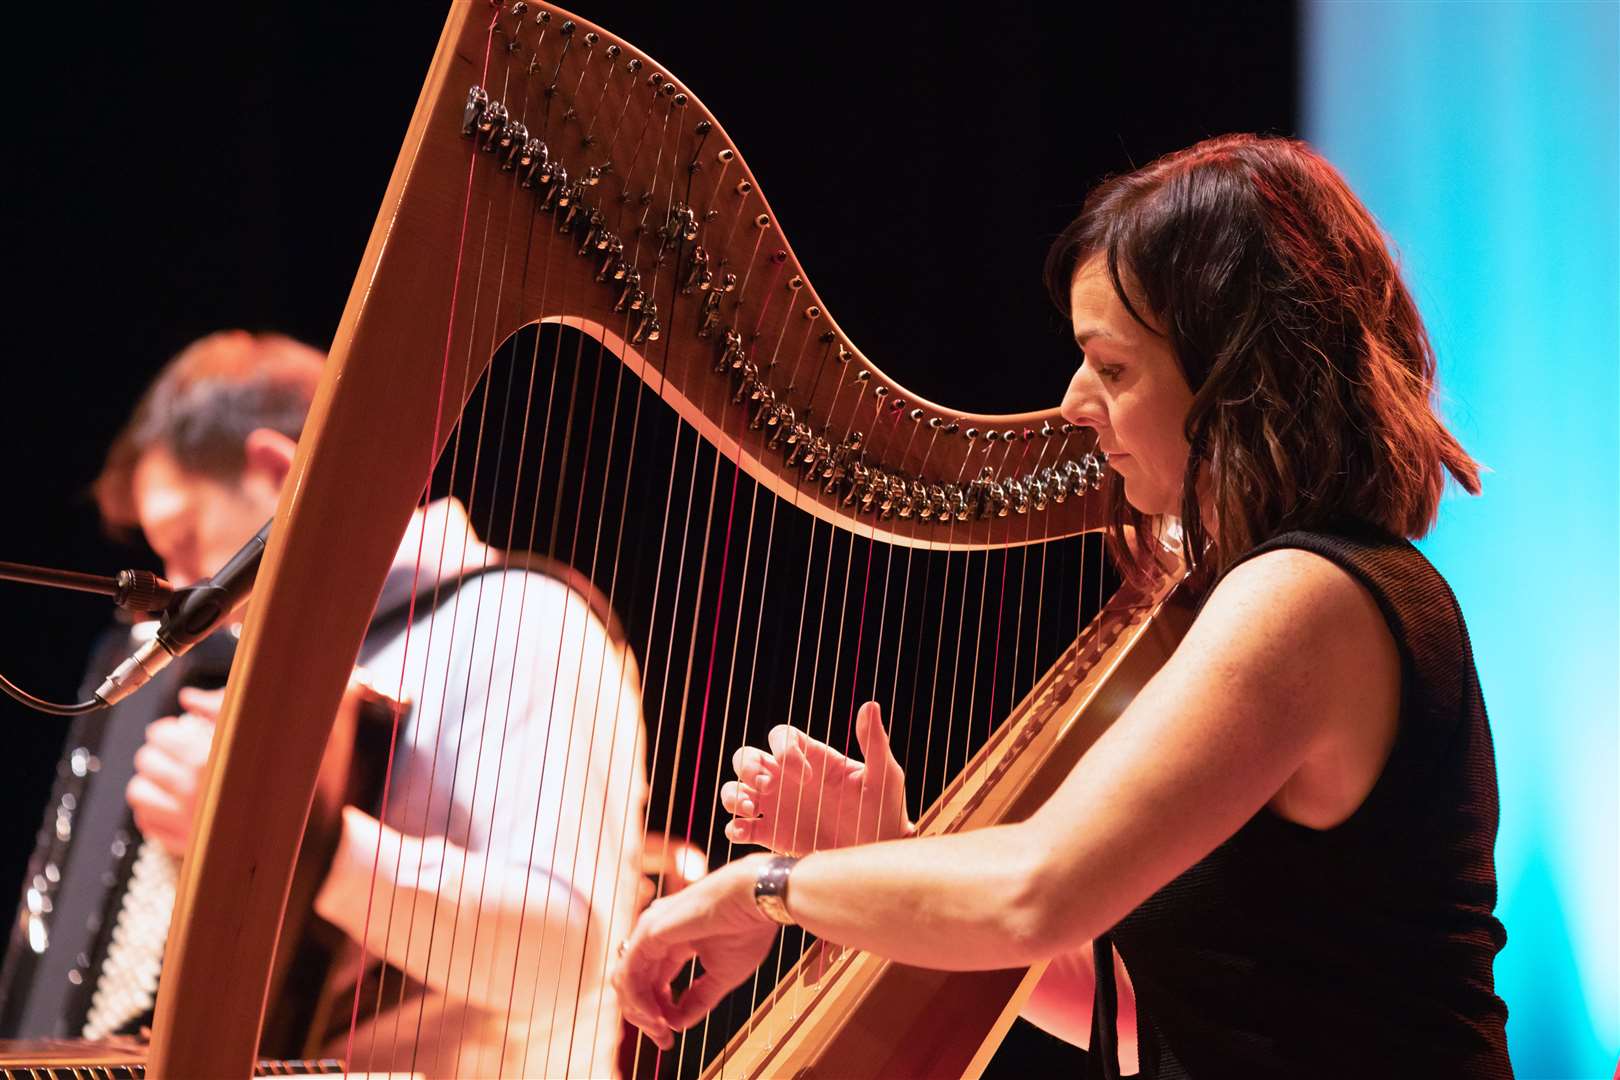 Ingrid Henderson of Glenfinnan Ceilidh Band performs on stage at Eden Court Theatre on the openng night of live music, The Royal National Mòd 2021